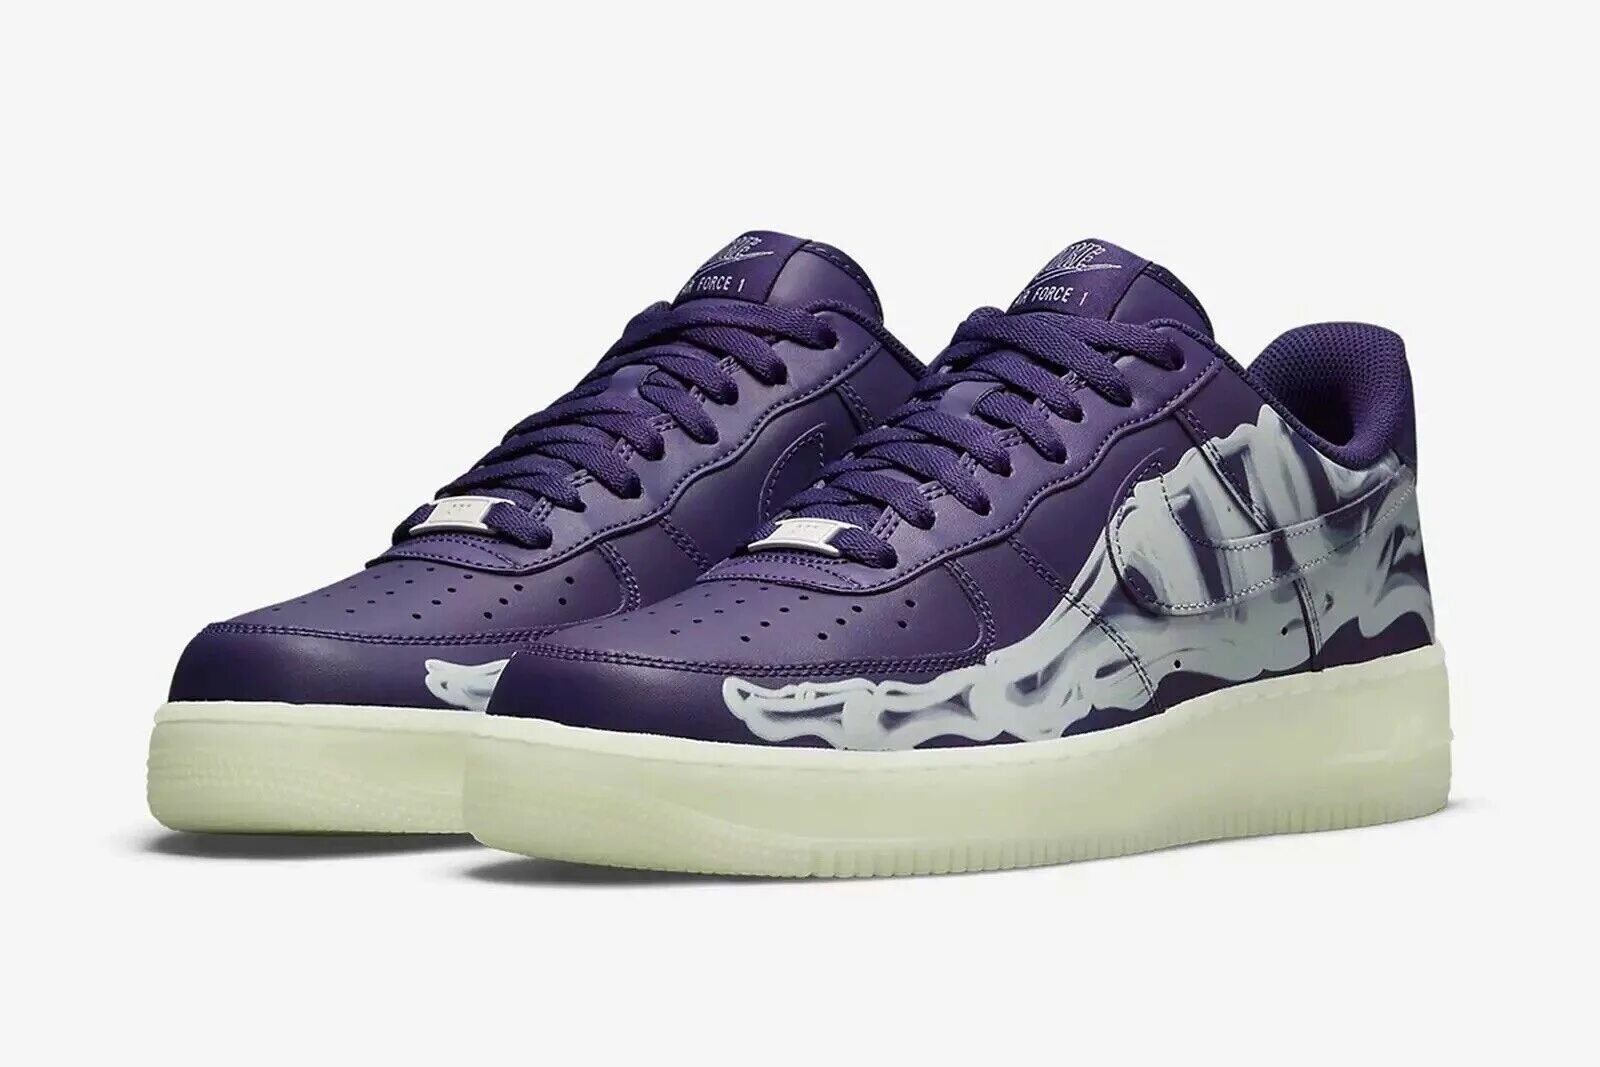 Force first force. Nike Air Force 1 Skeleton Purple. Nike Air Force Skeleton Purple. Nike Air Force 1 Low Skeleton. Nike Air Force 1 Low 07 Low.